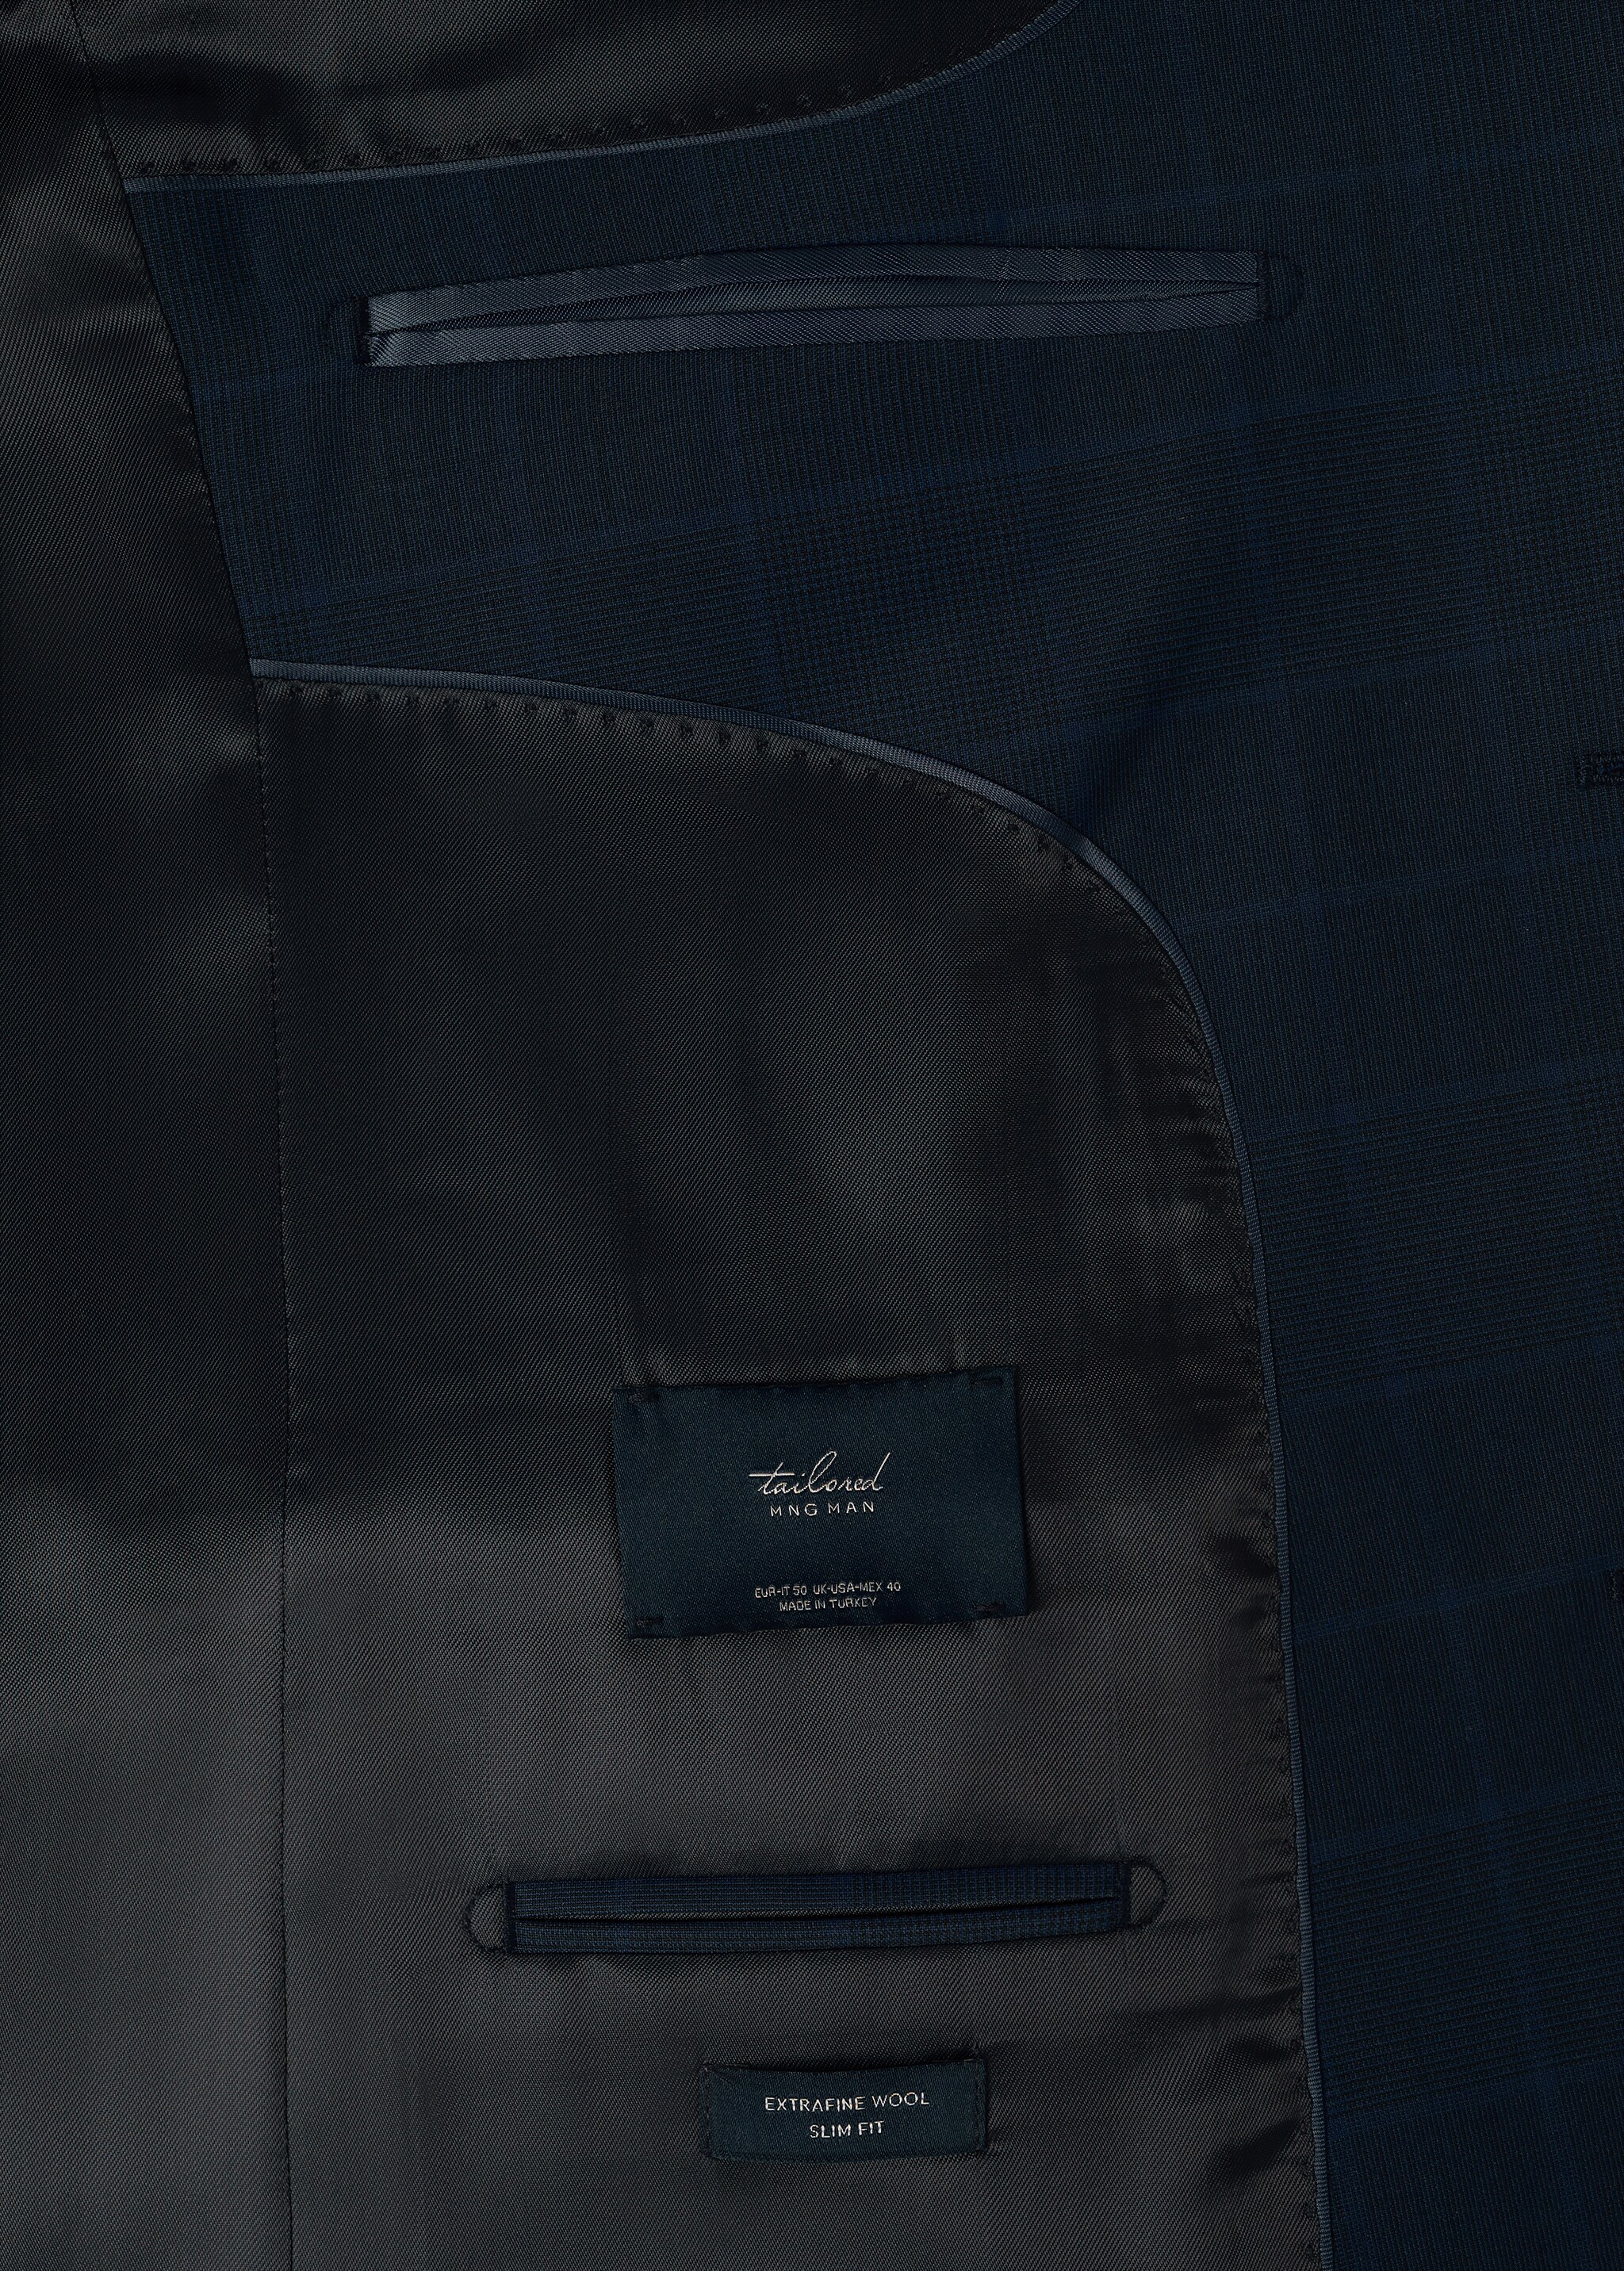 Wool suit jacket - Details of the article 8